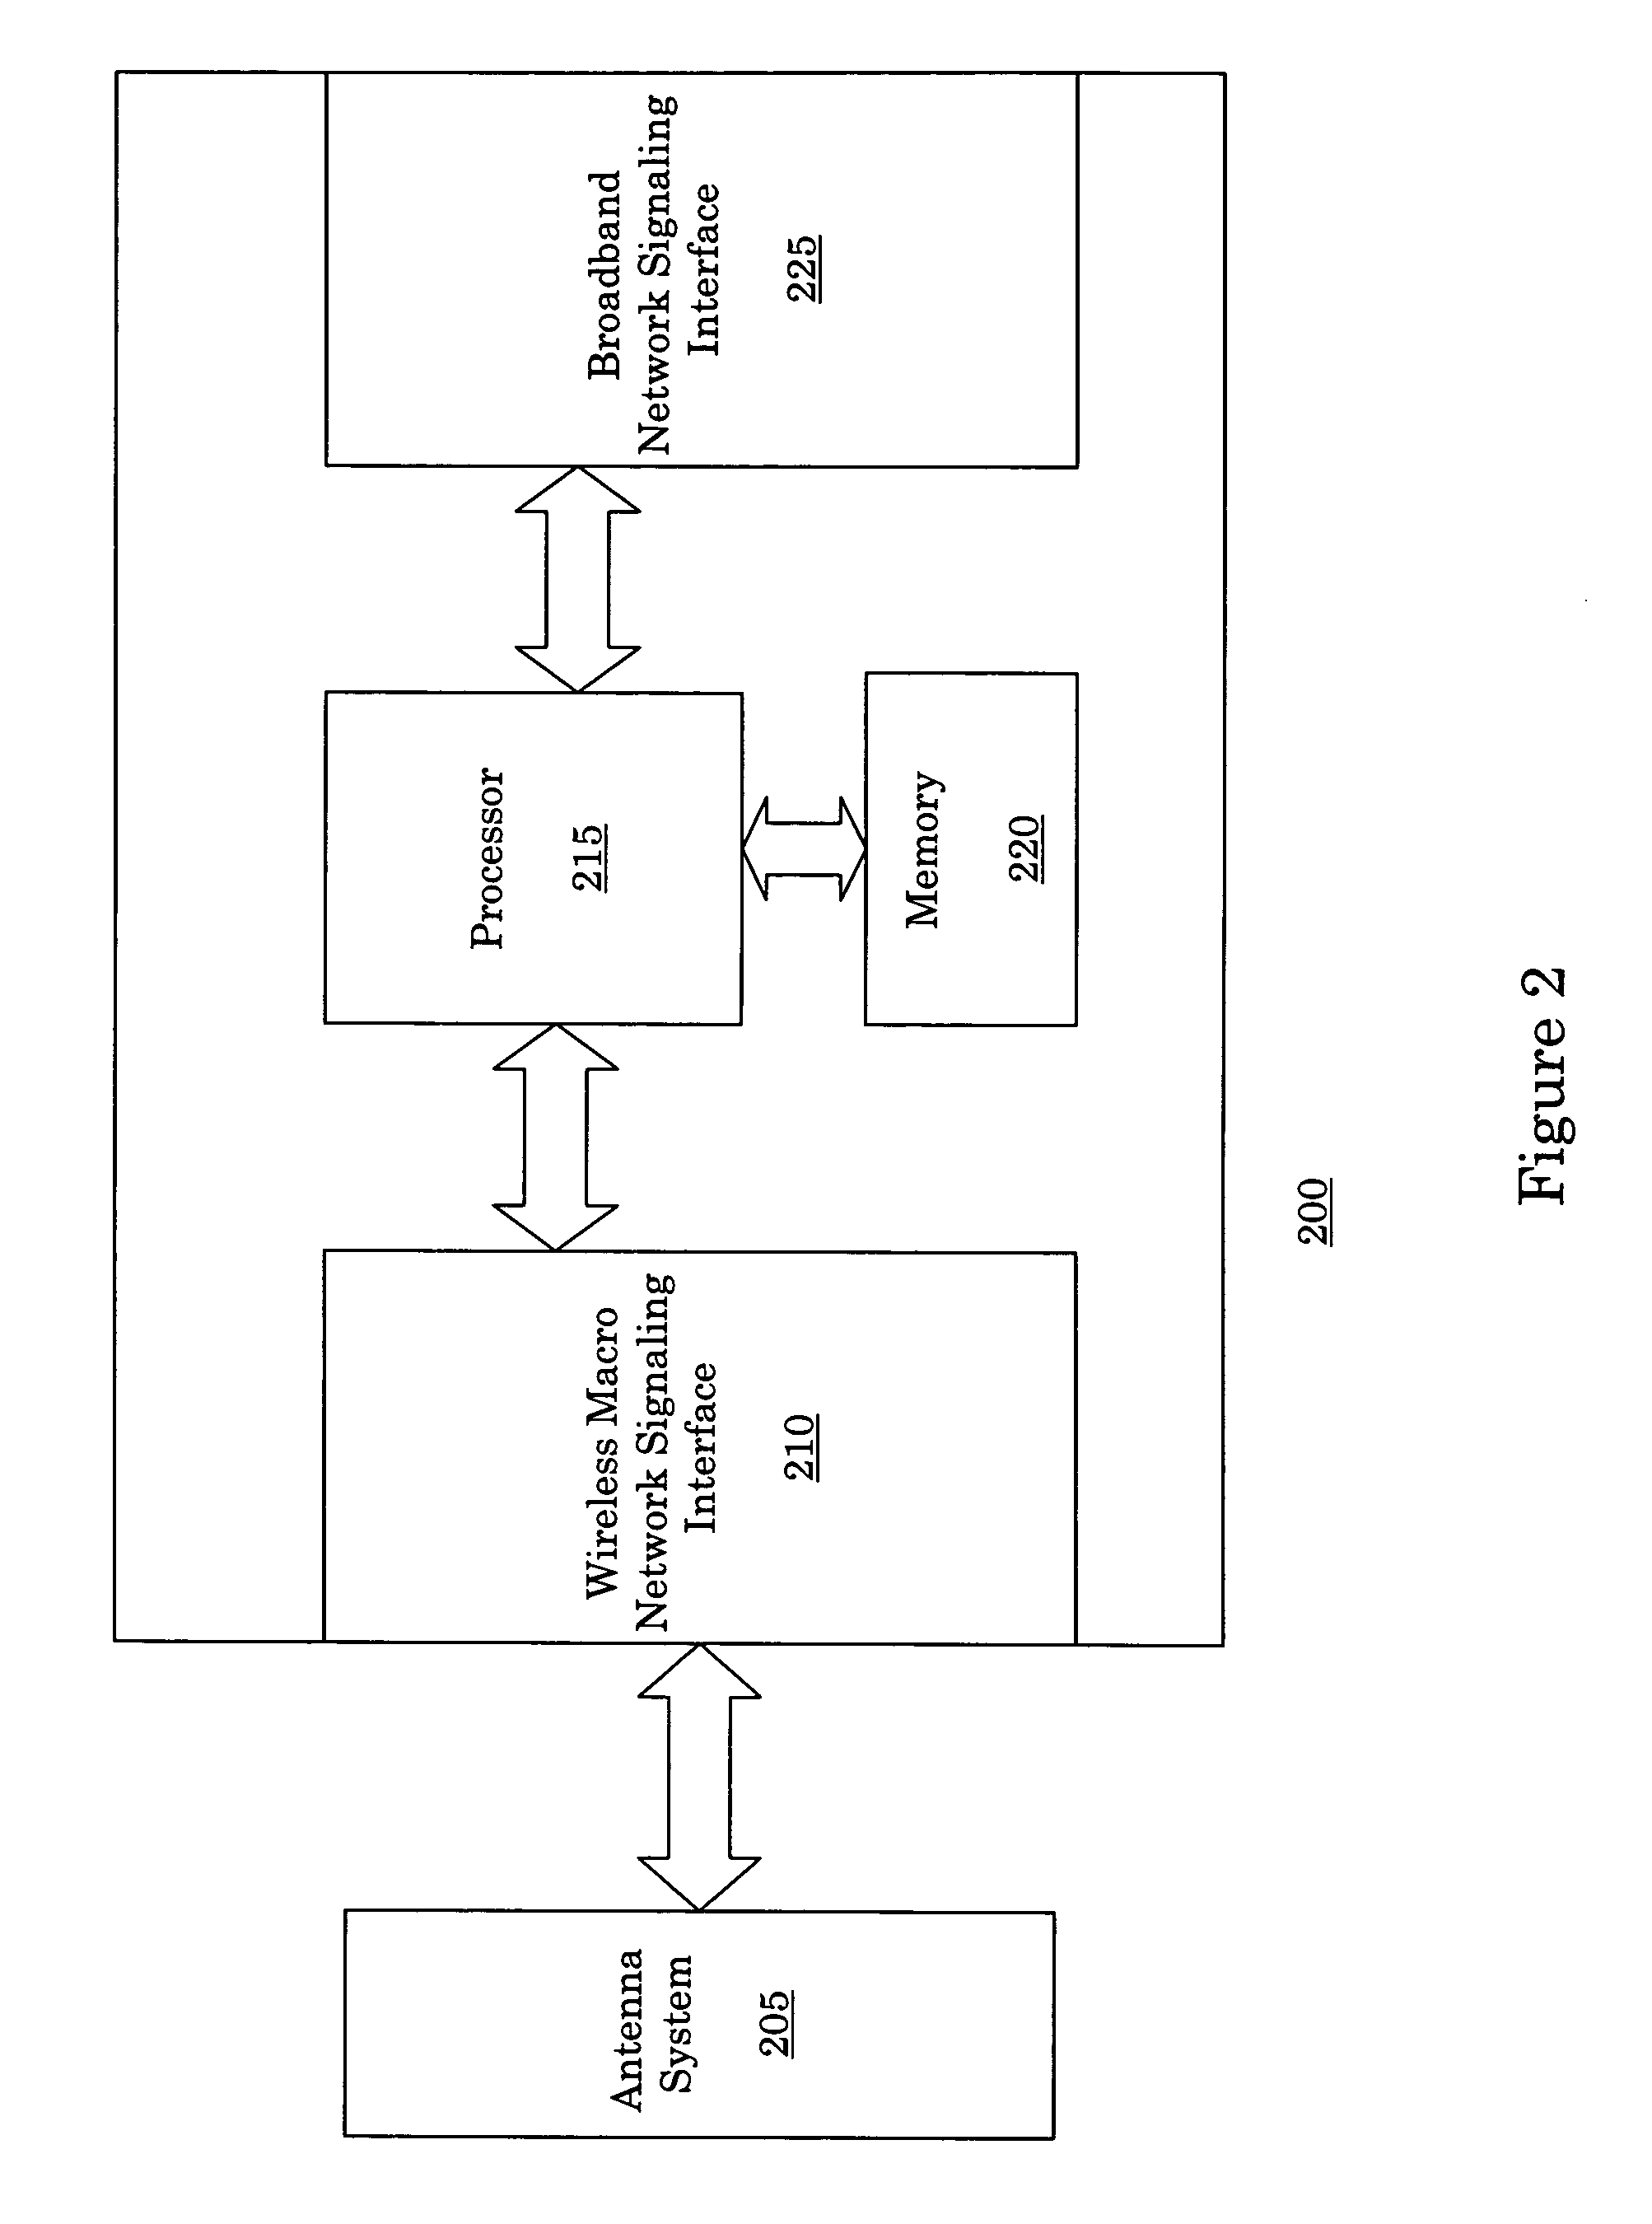 System and method for a private wireless network interface